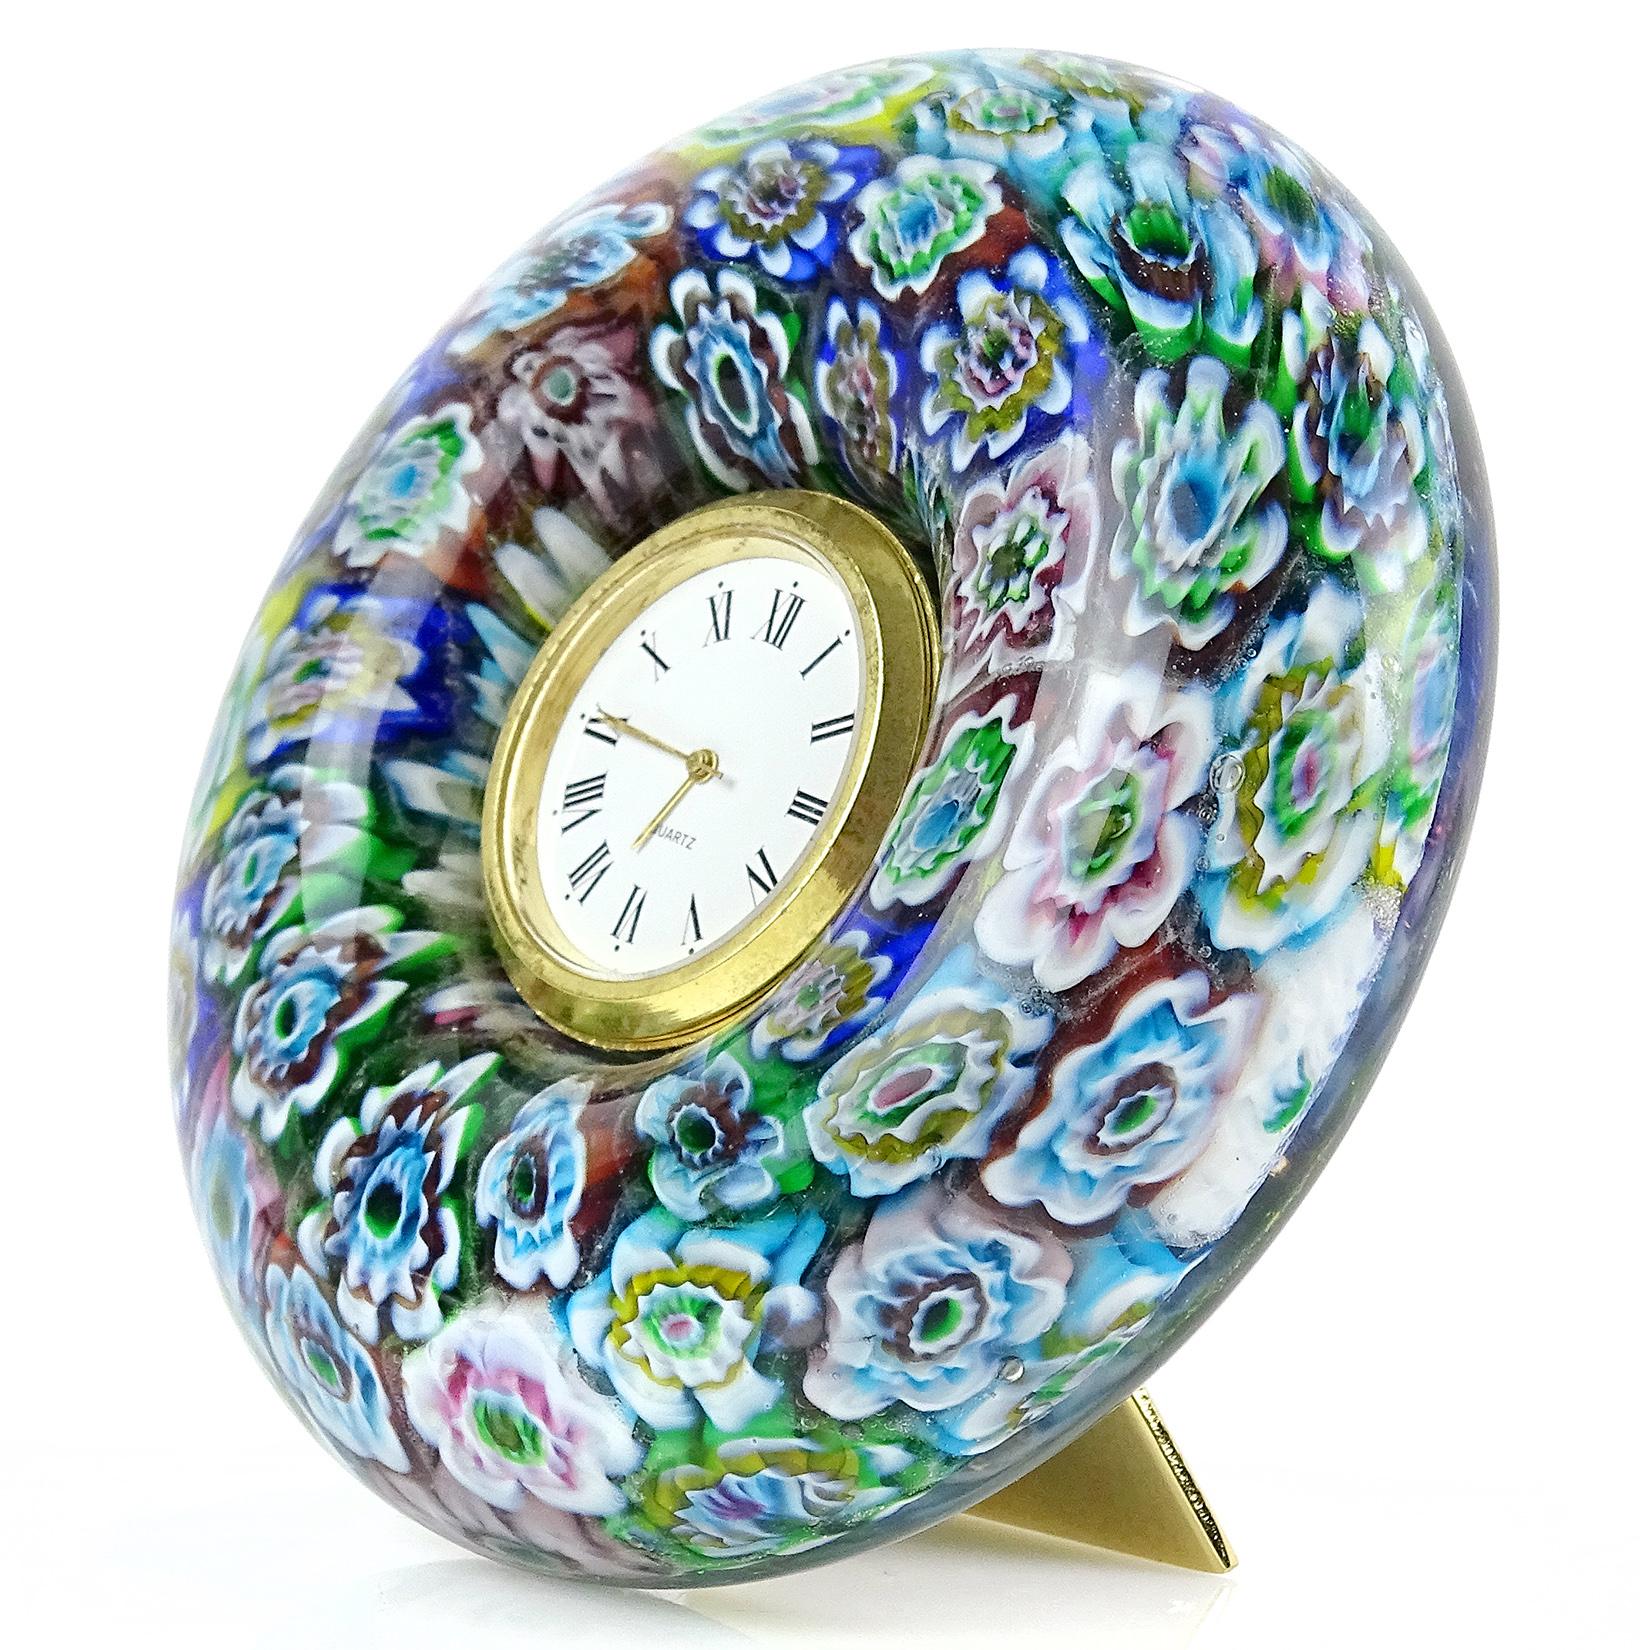 Beautiful Murano hand blown millefiori flower mosaic Italian art glass desk clock. It has a Quartz clock face, a triangle stand on the back, and battery operated clock face (new battery needed). Has original 